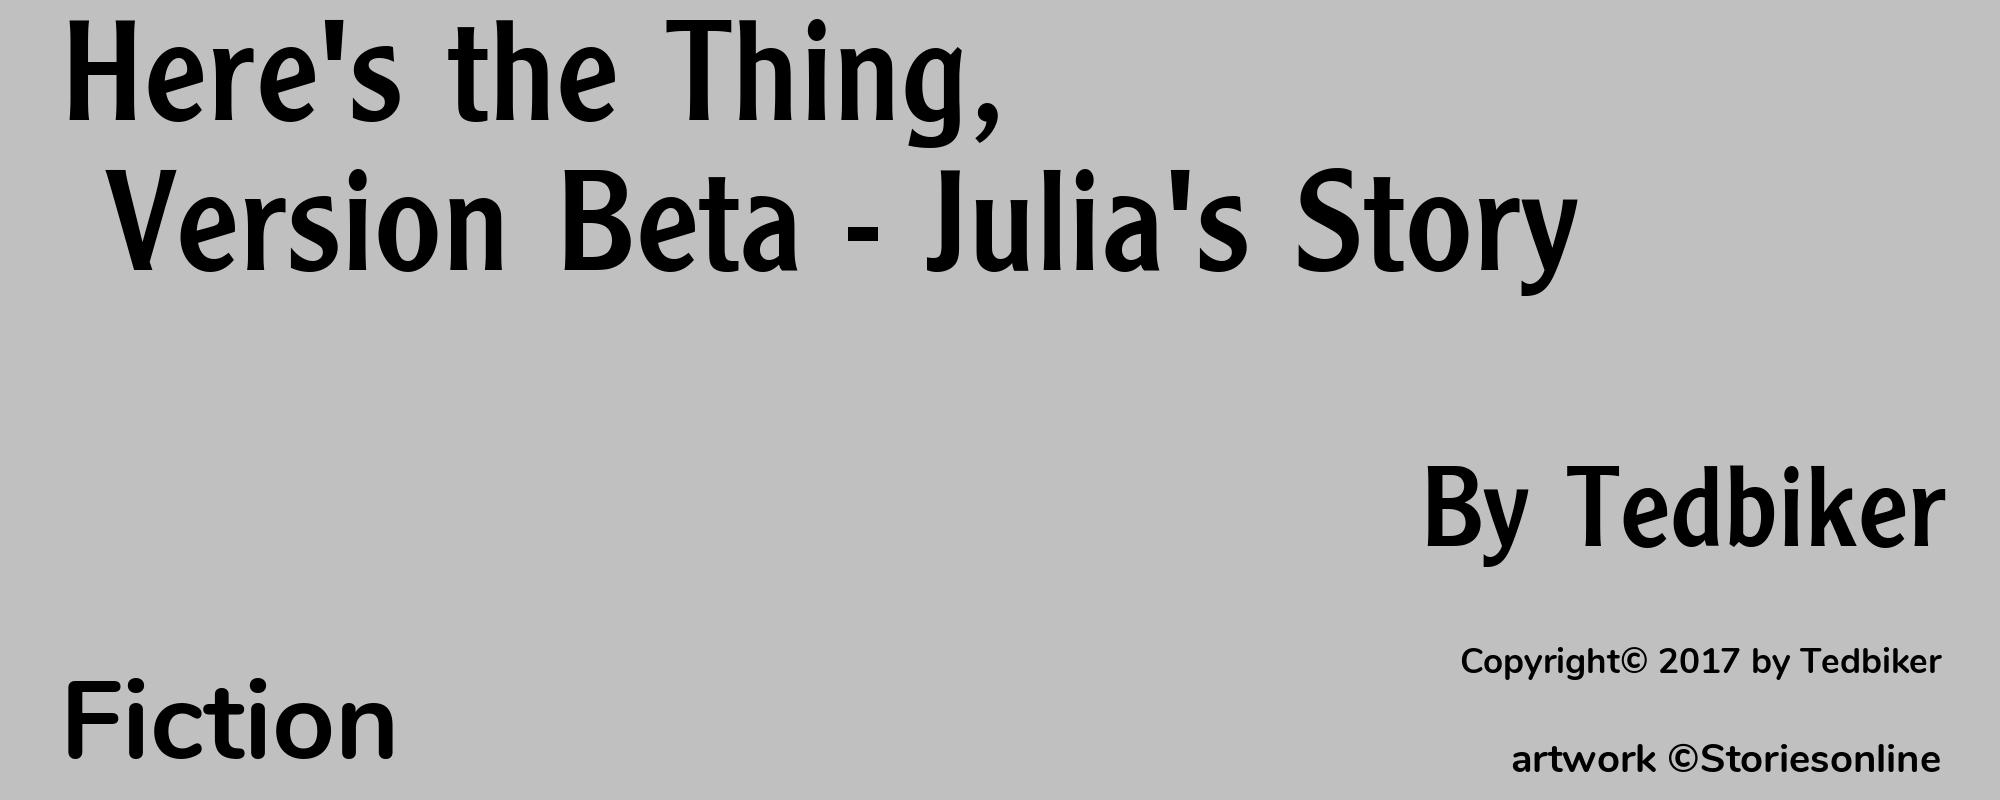 Here's the Thing, Version Beta - Julia's Story - Cover